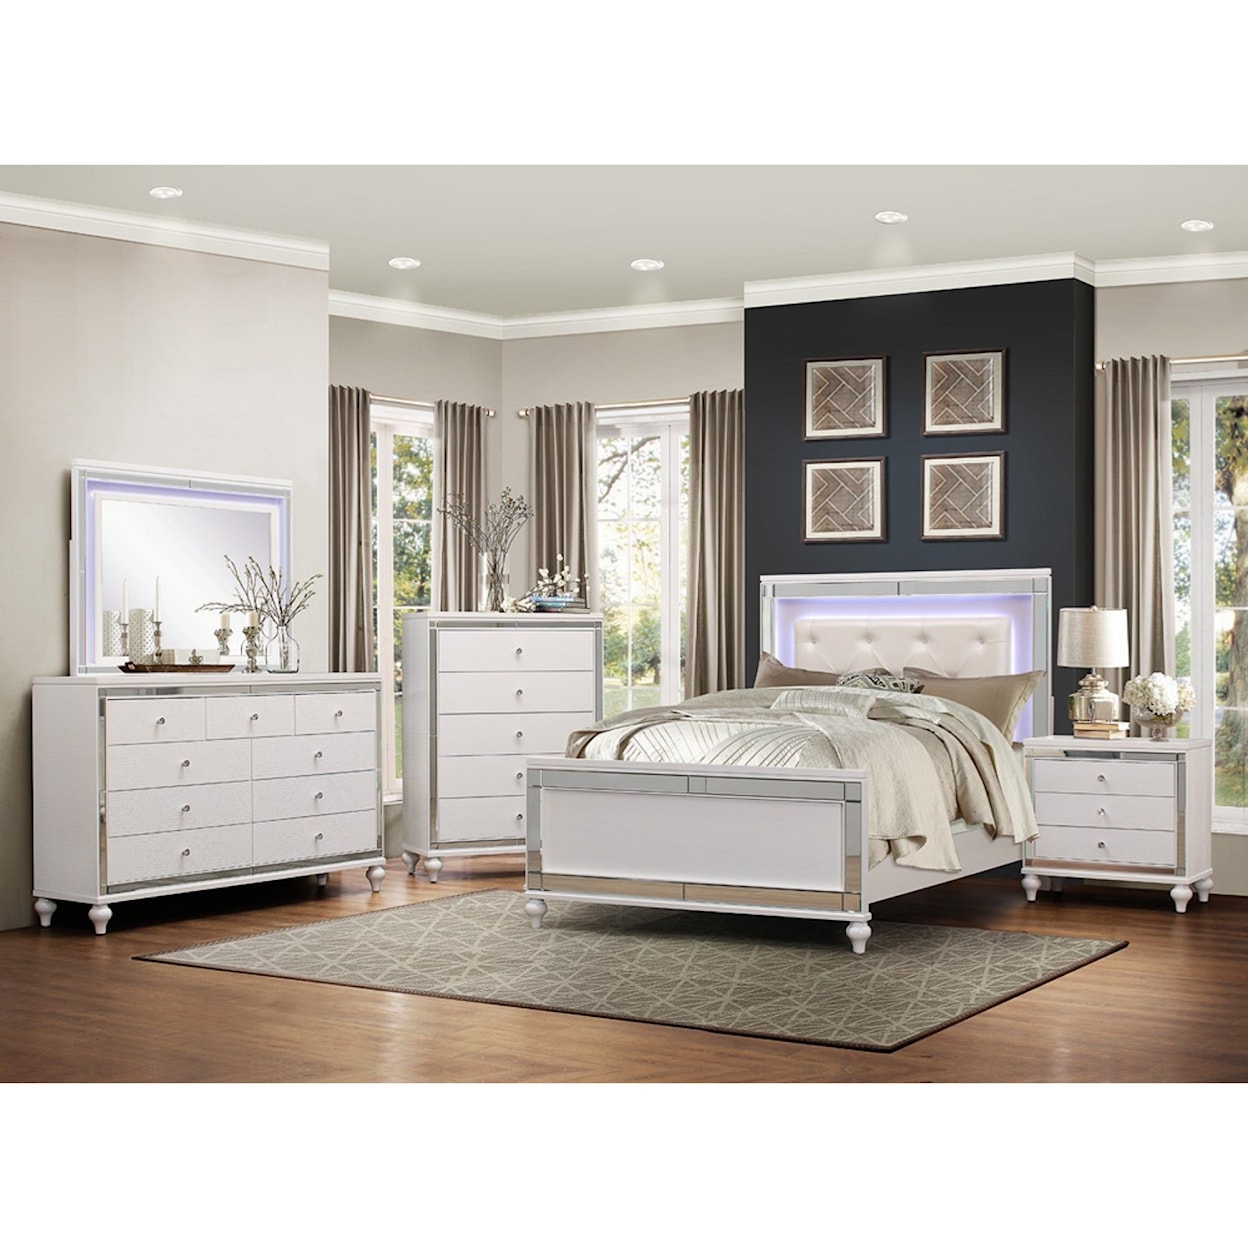 Homelegance Alonza Cal King Bedroom Group without Chest